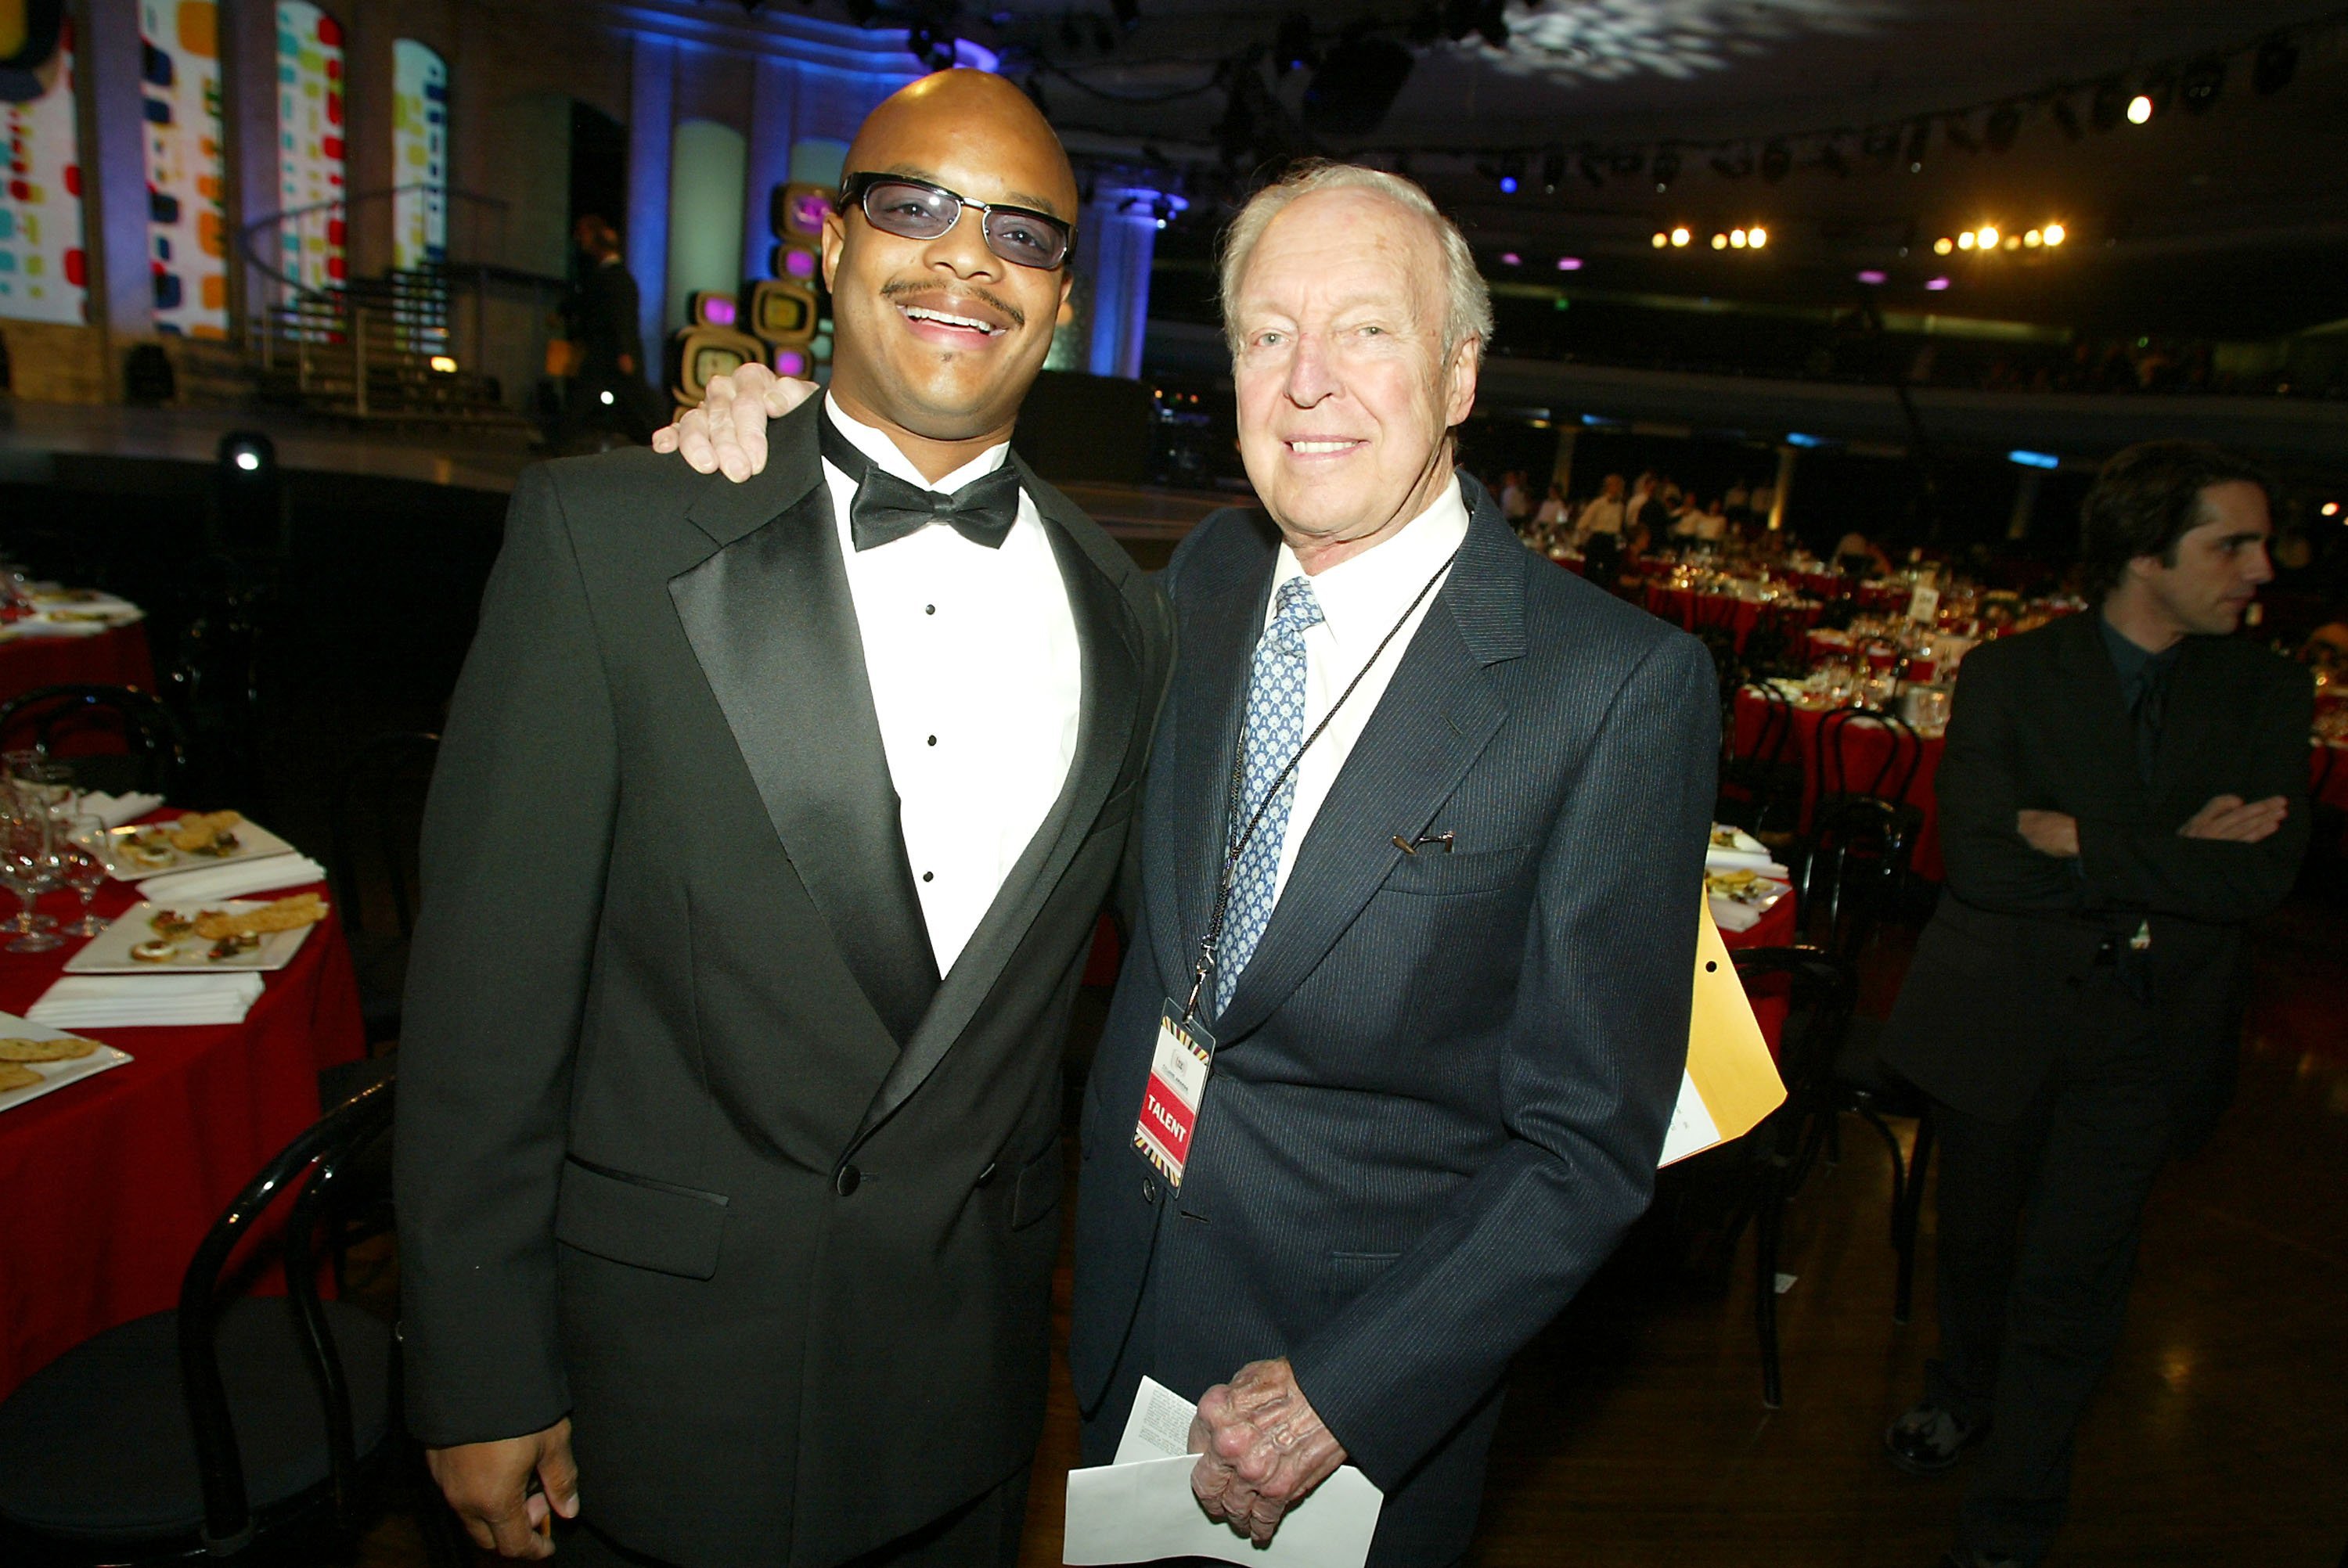 Todd Bridges poses with Conrad Bain during the TV Land Awards at the Hollywood Palladium on March 2, 2003, in Hollywood, California | Photo: Kevin Winter/Getty Images